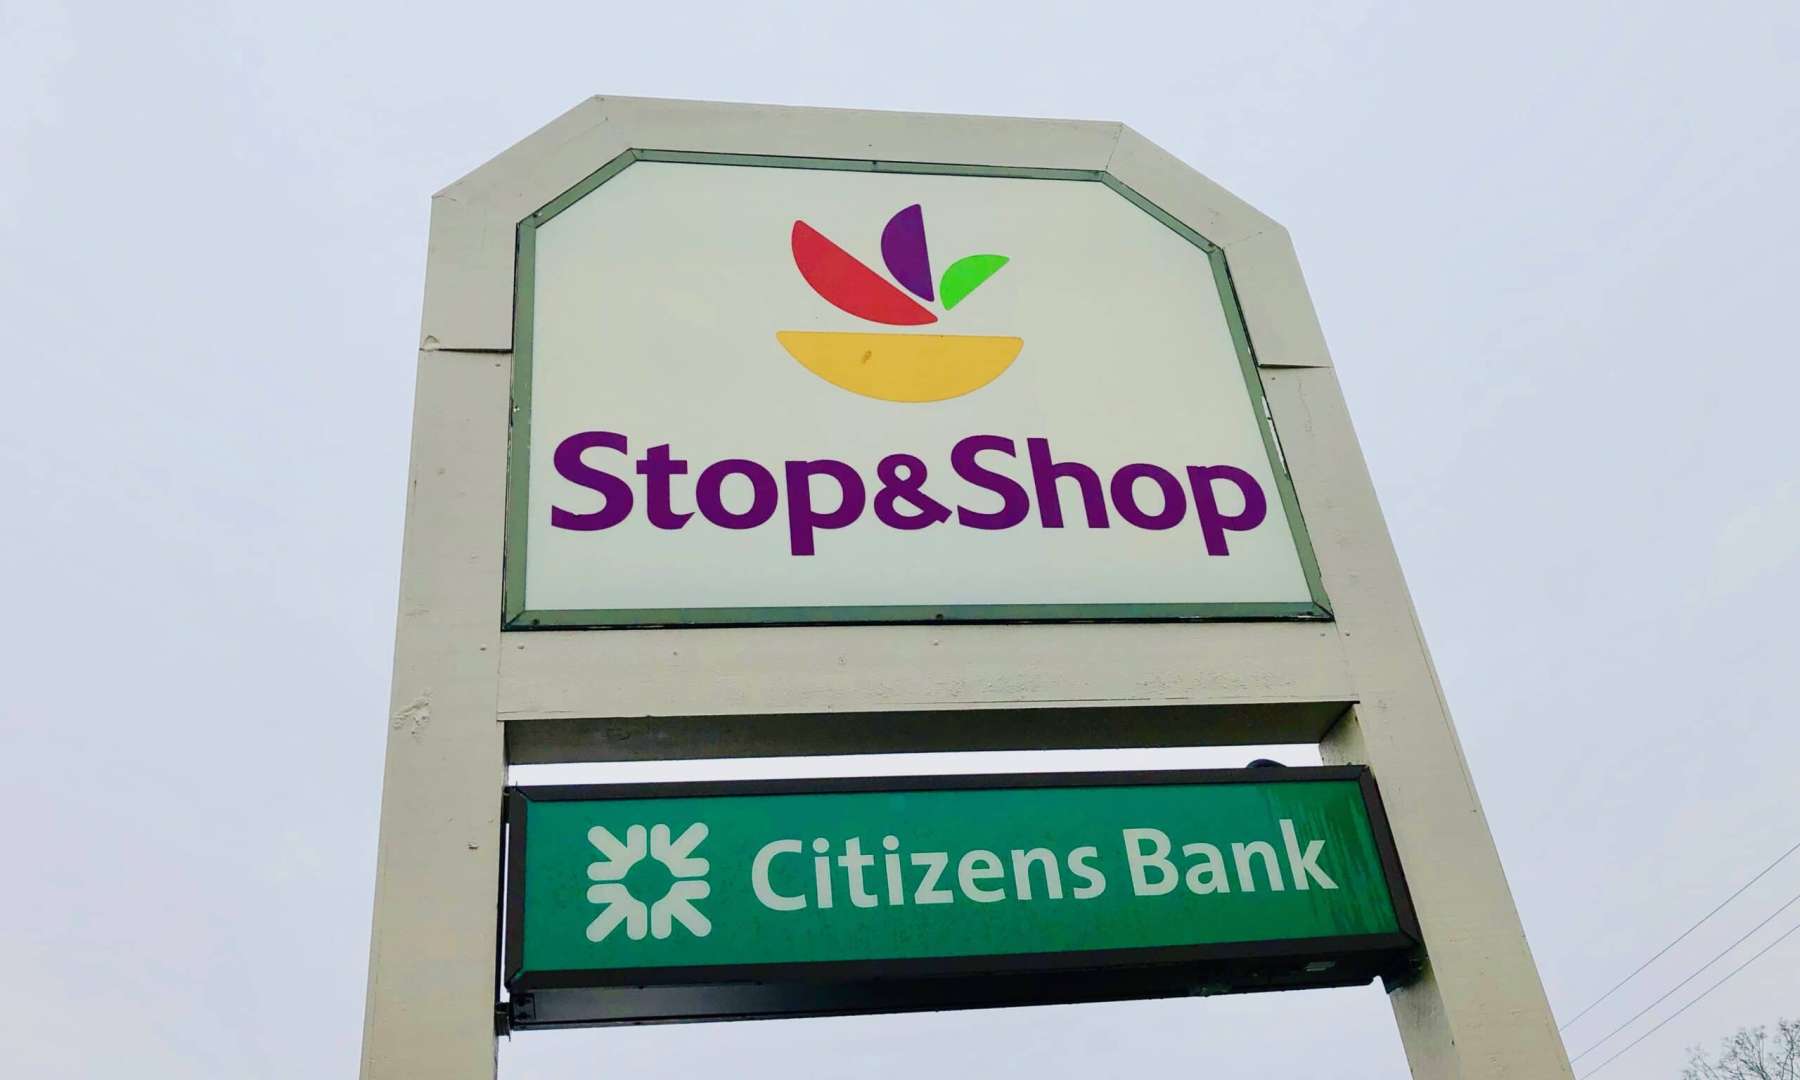 Union contract with Stop & Shop ends at midnight; talks continue, strike authorization votes called